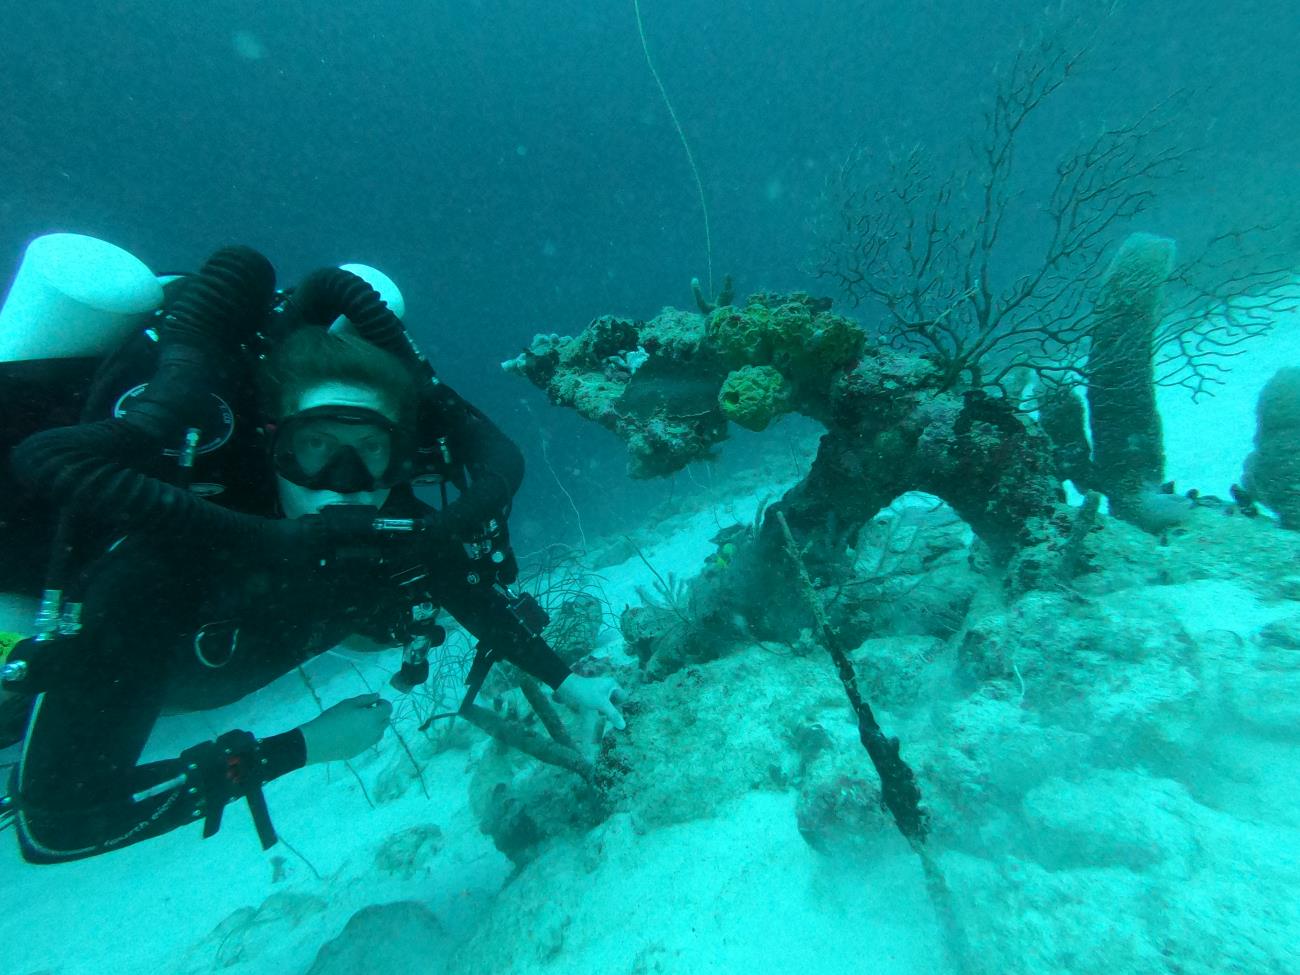 Kirstin Meyer-Kaiser at 70 m deep in Bonaire, next to a 19th-century anchor covered in sponges and sea fans